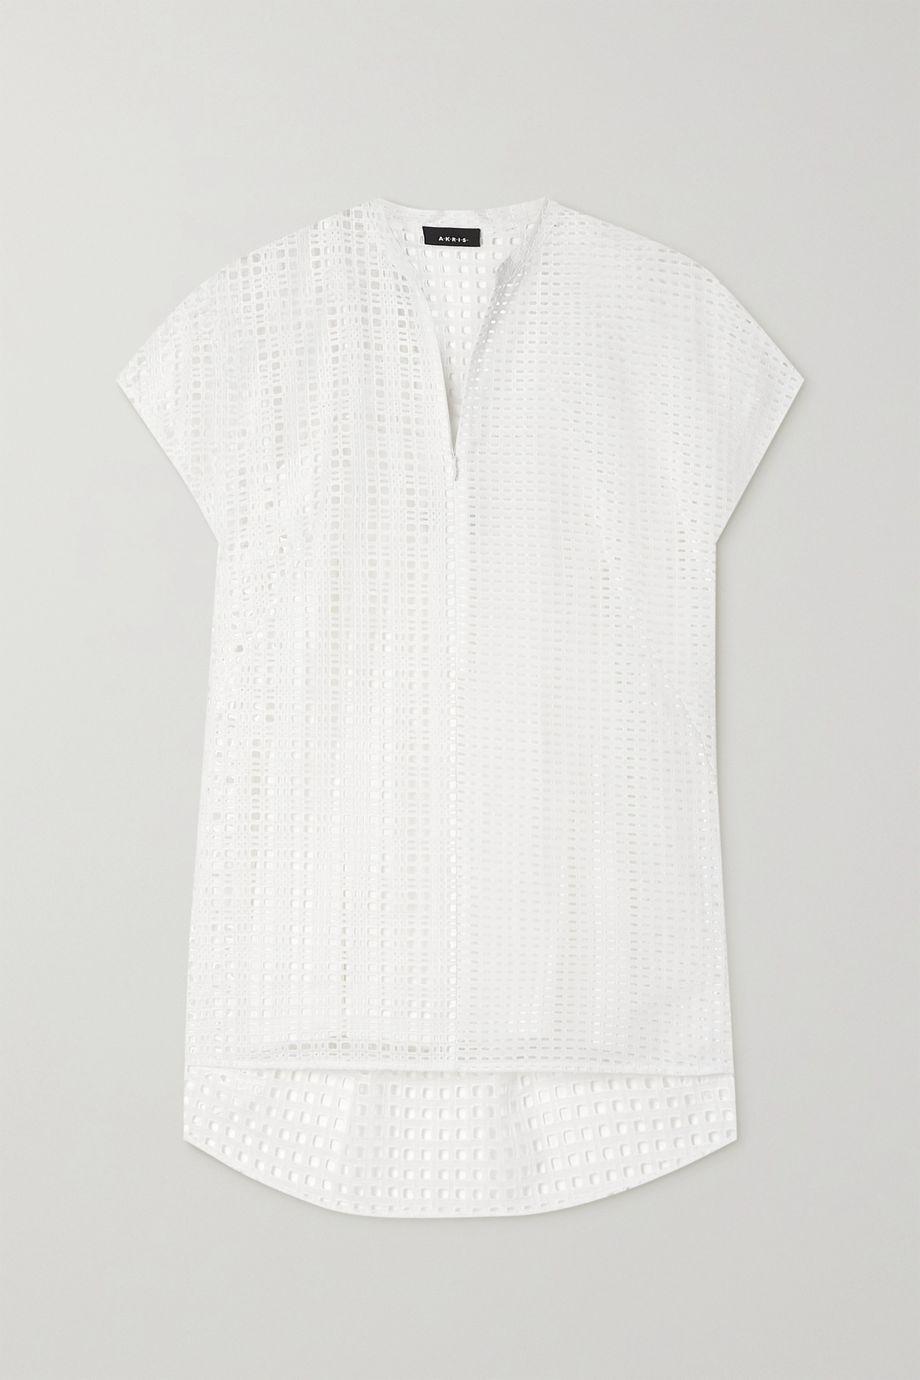 Broderie anglaise blouse by AKRIS